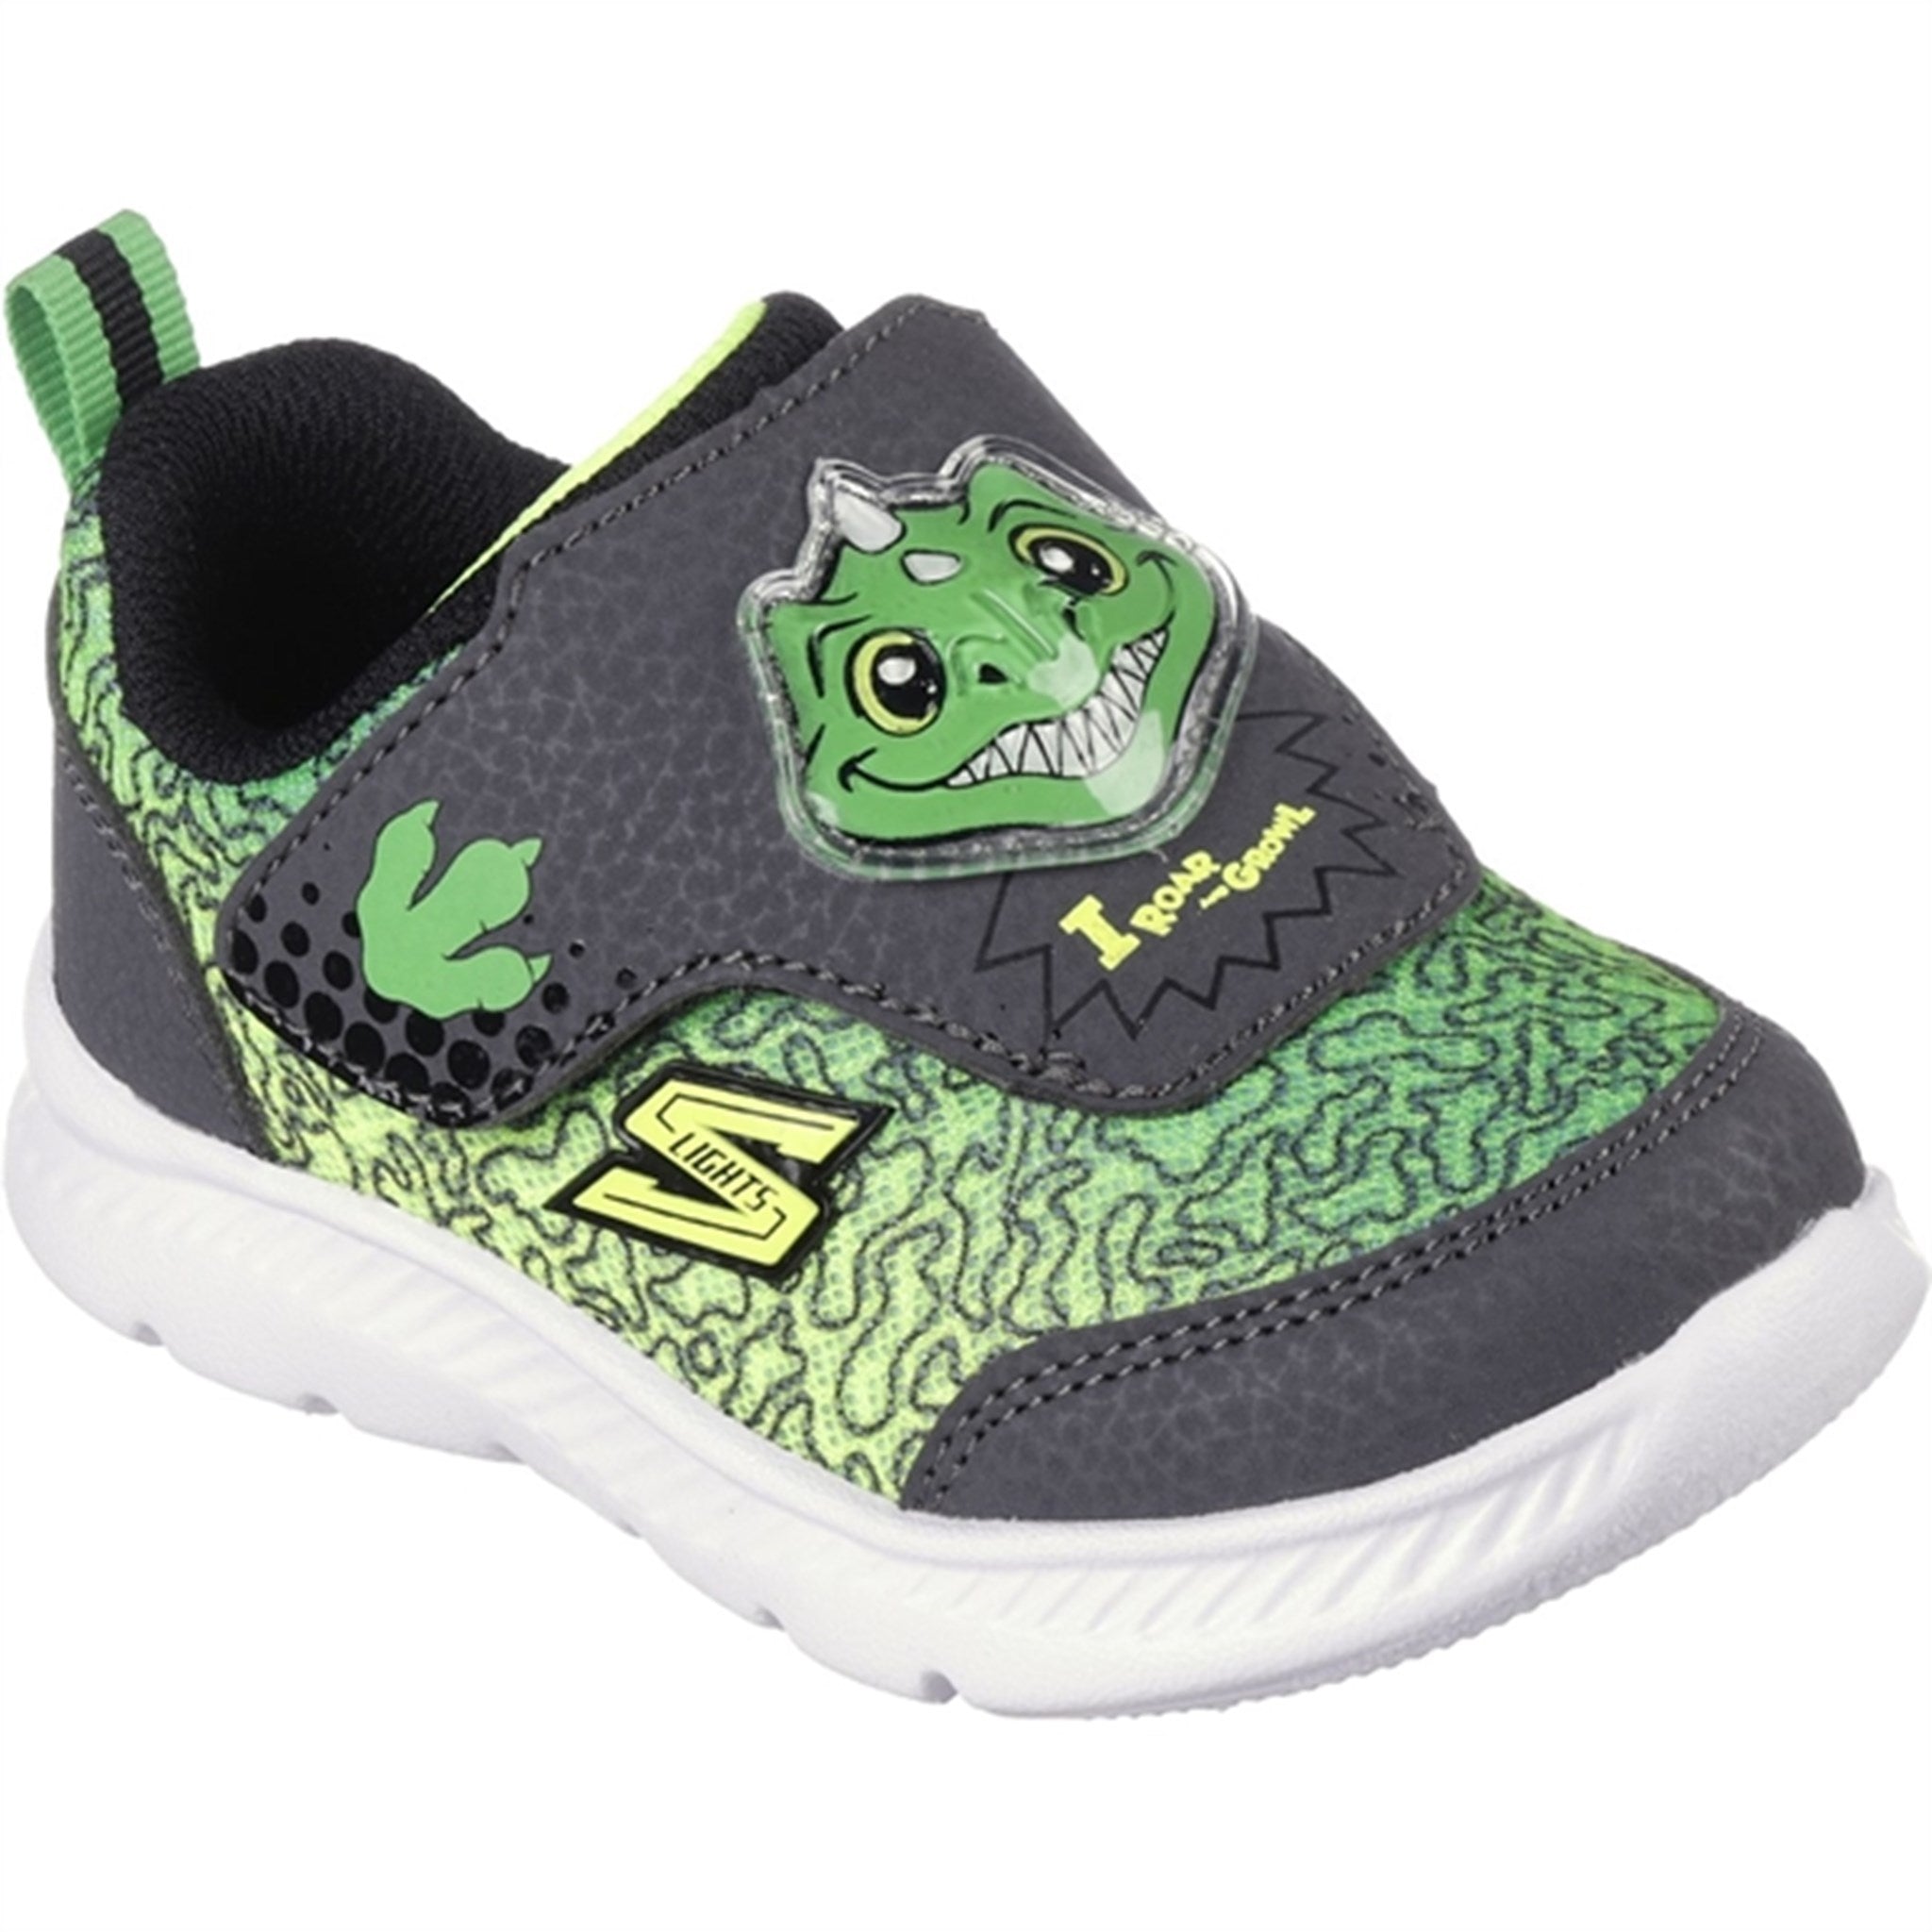 Skechers Boys Comfy Flex 2,0 Sneakers Charcoal Lime